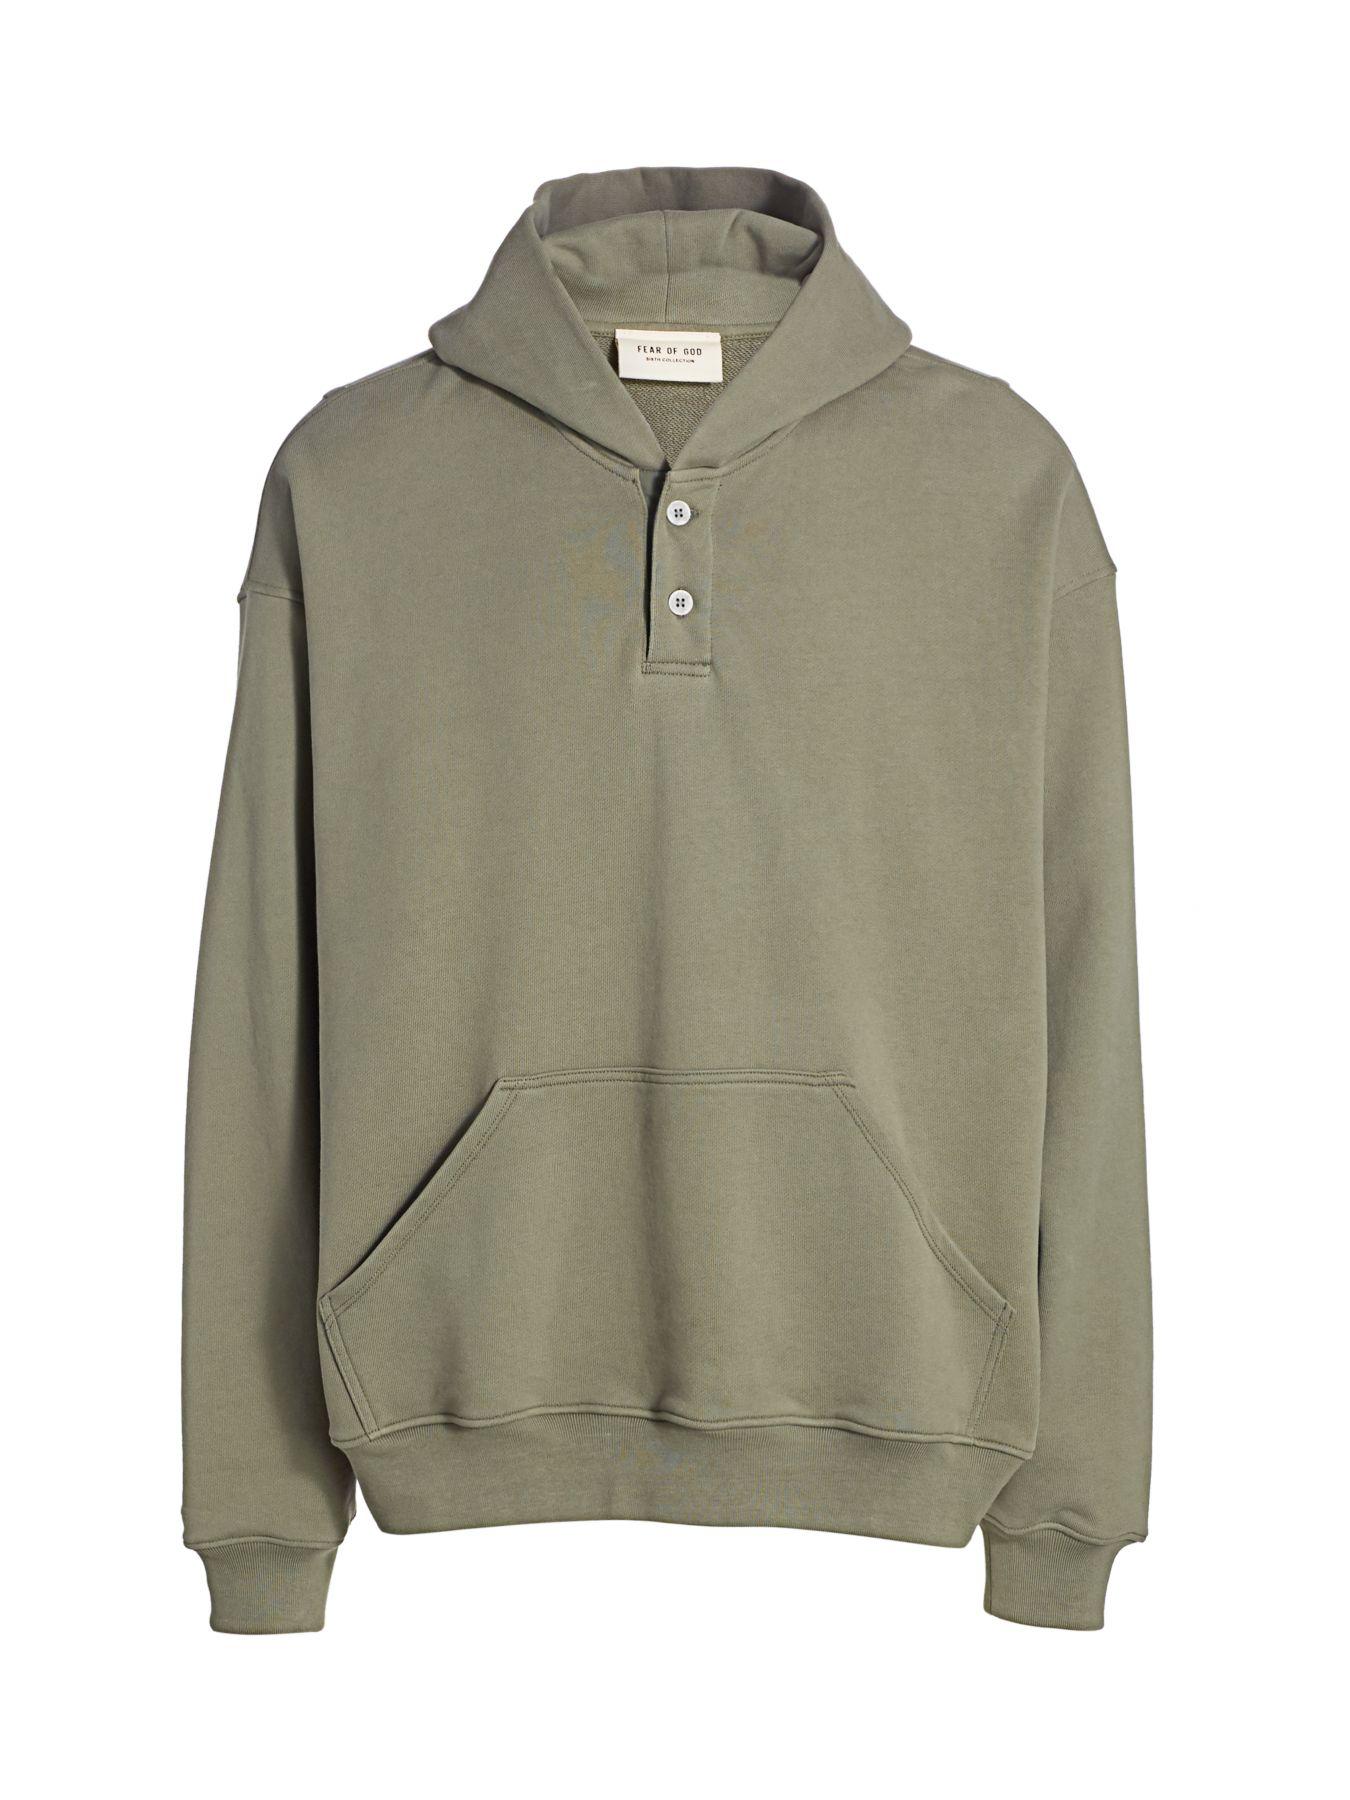 Fear Of God Cotton Everyday Henley Hoodie in Army Green (Green 